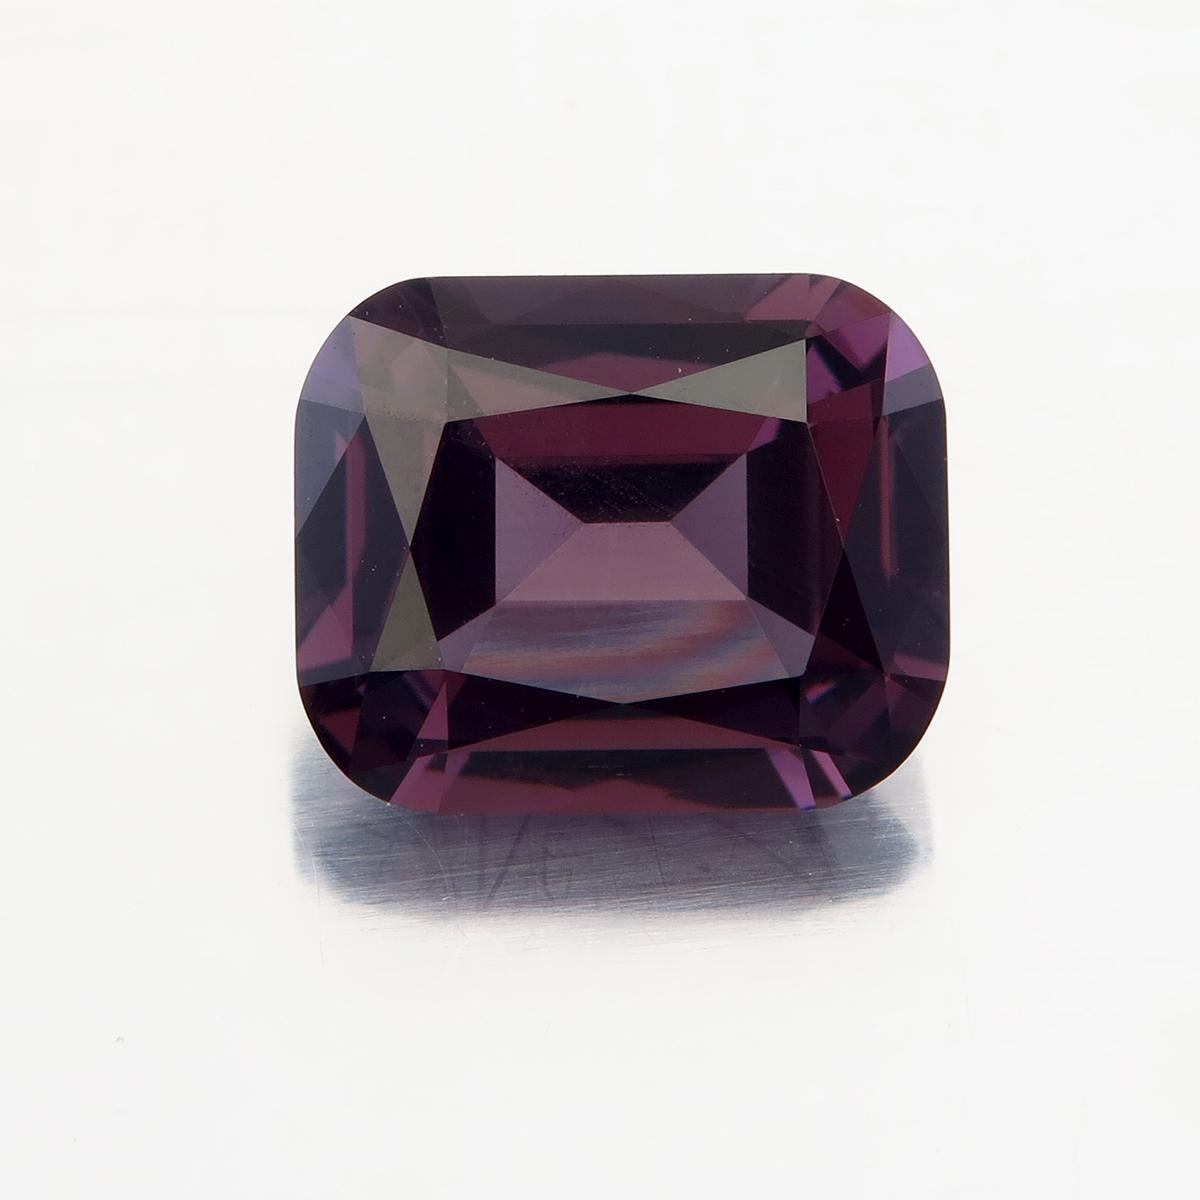 3.56 Carat Purple Spinel from Sri Lanka know in the past variously as Serendib or the 